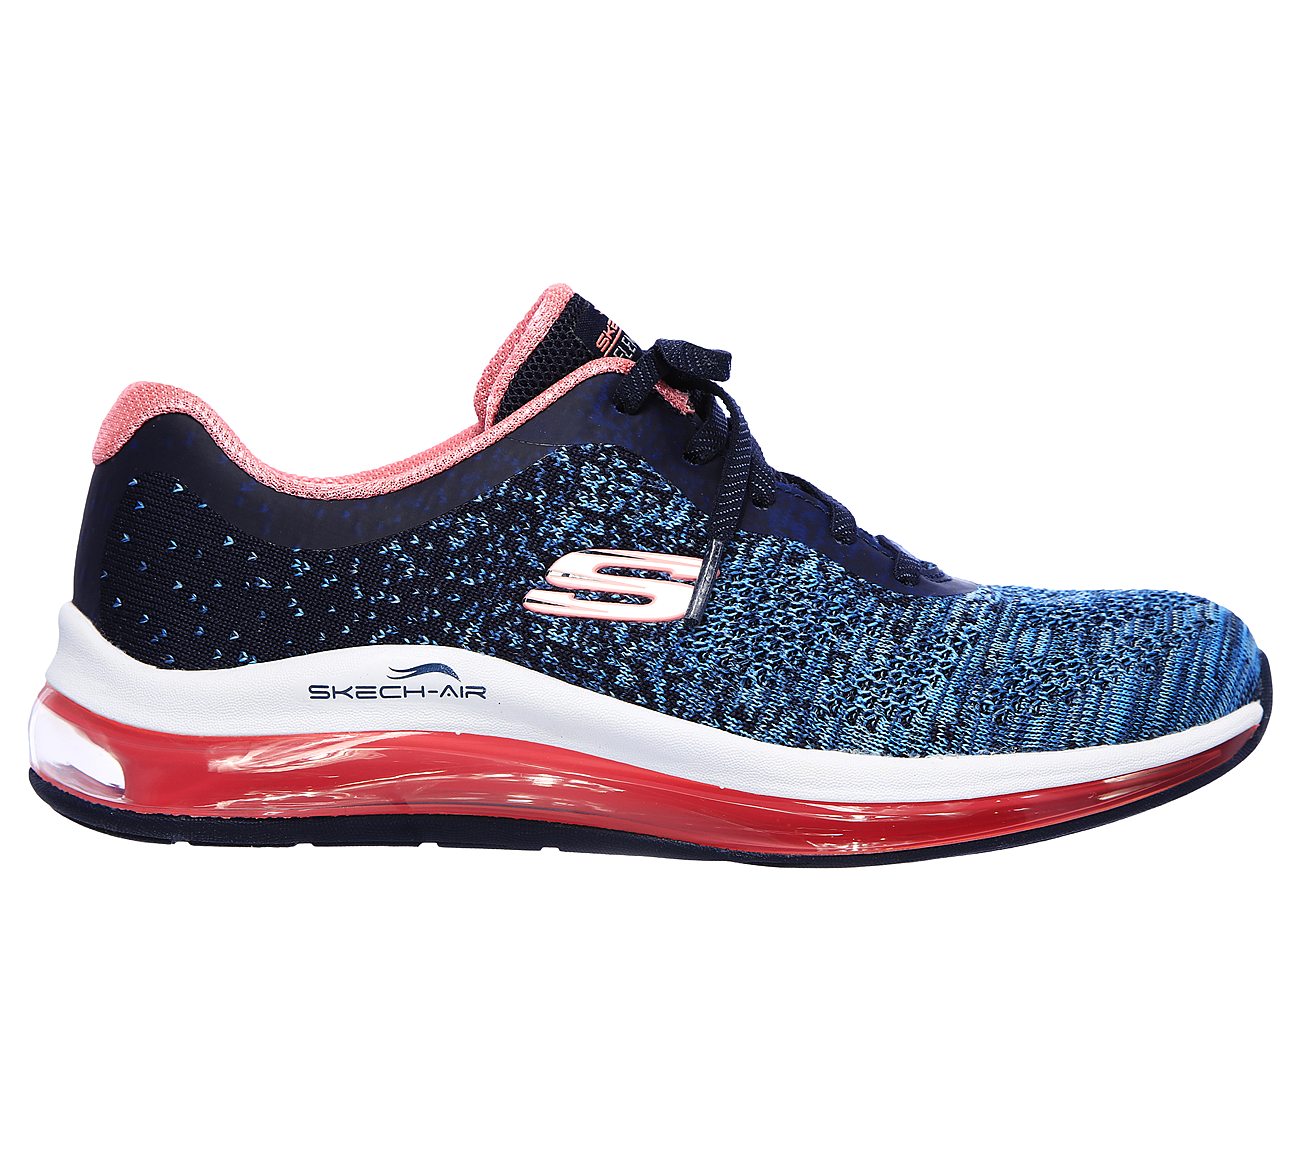 SKECH-AIR ELEMENT 2.0-DANCE T, NAVY/HOT PINK Footwear Right View